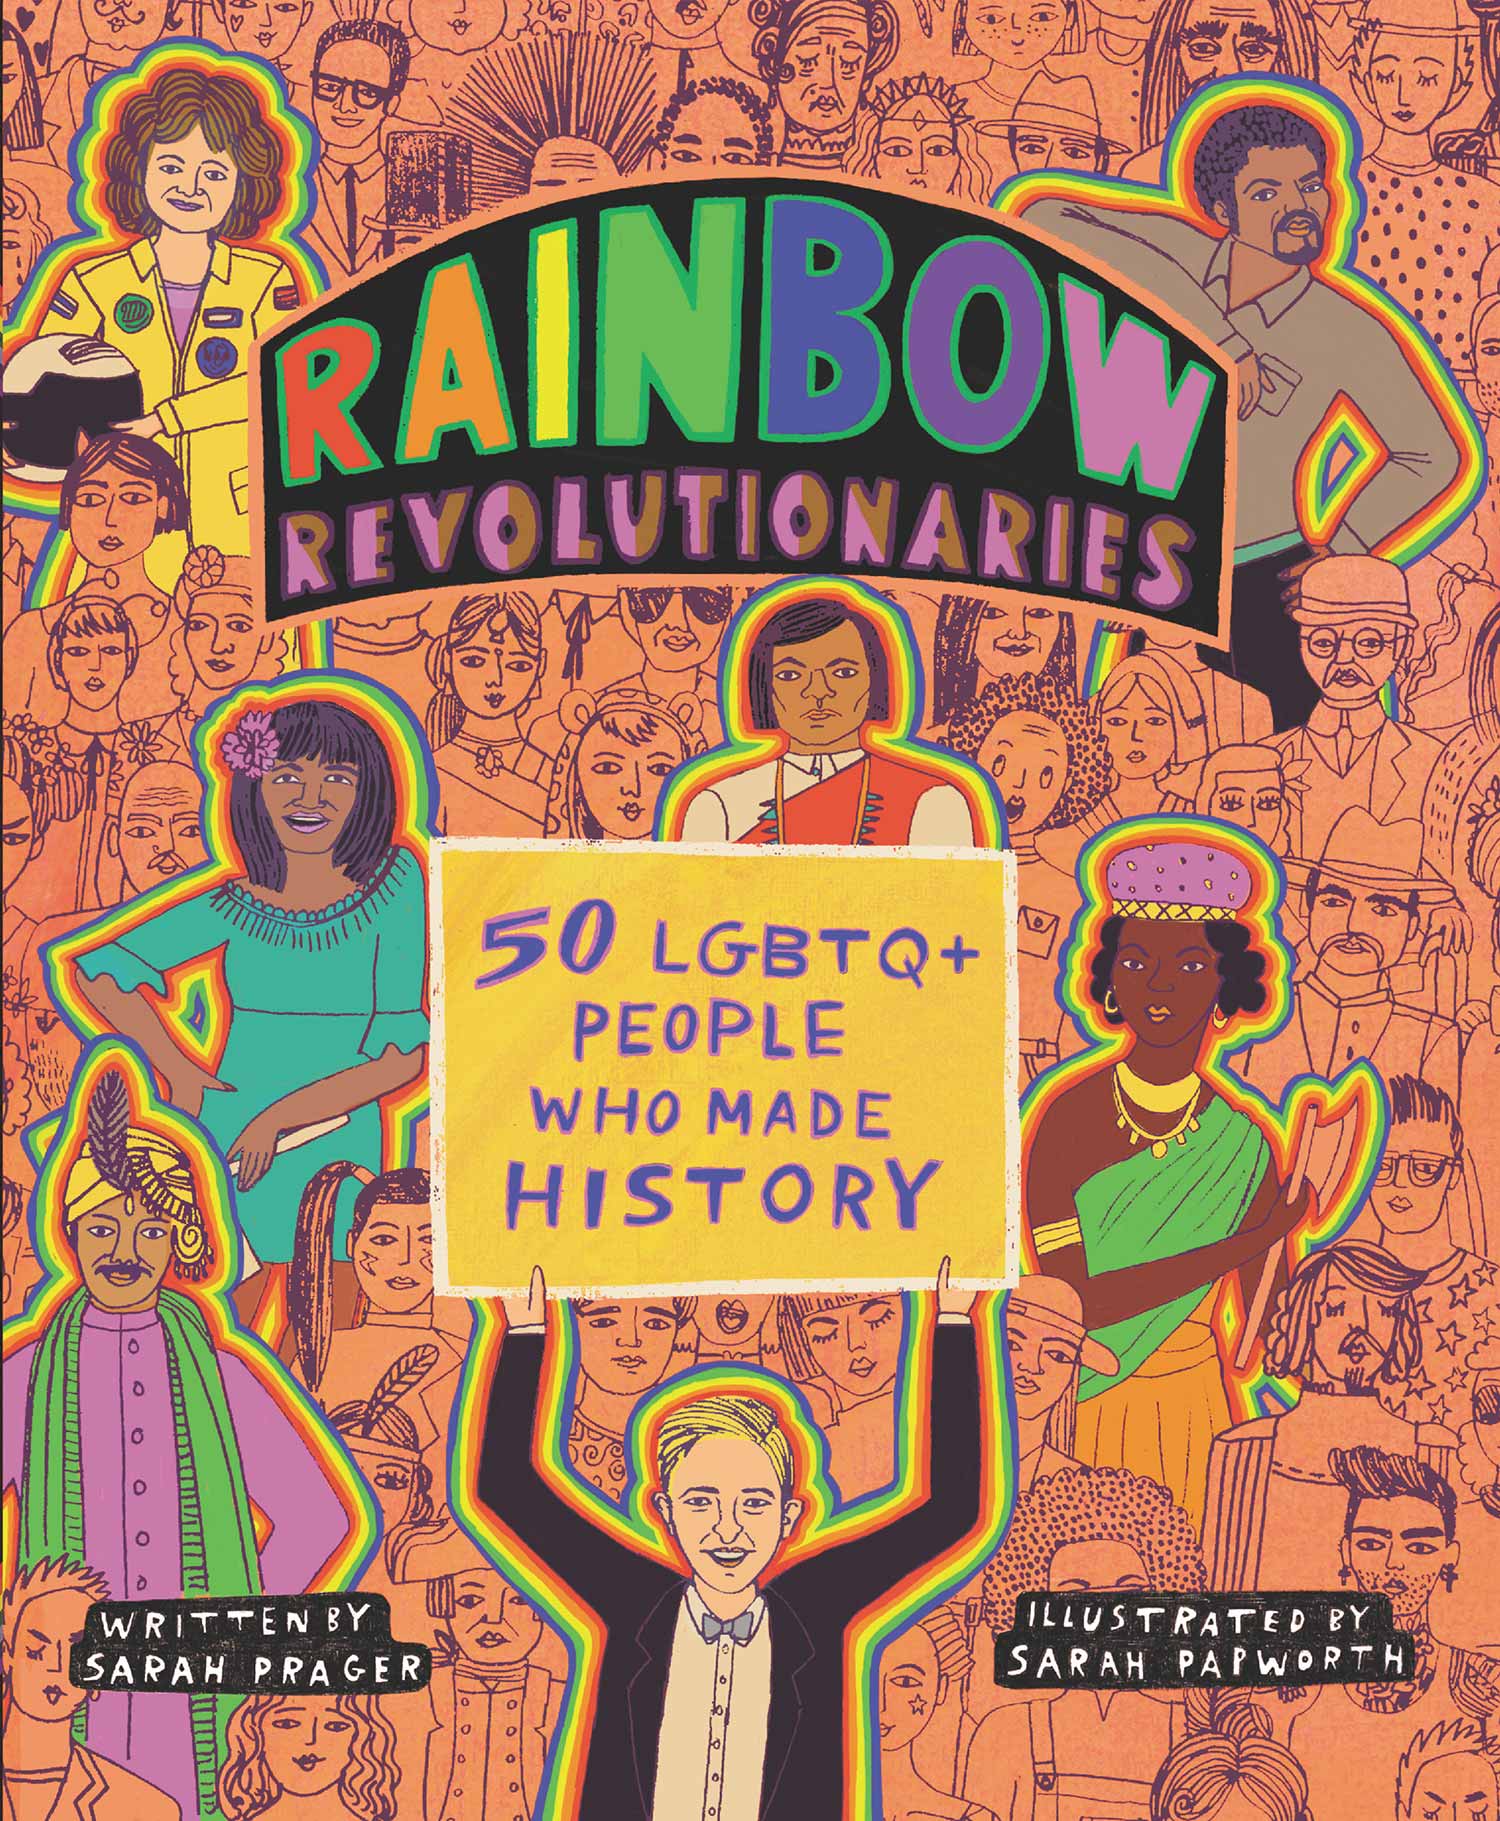 Illustrated Book Cover for "Rainbow Revolutionaries: 50 LGBTQ People Who Made History" which is written in rainbow text. Around the colorful text are illustrated drawings of prominent LGBTQ+ people throughout history.